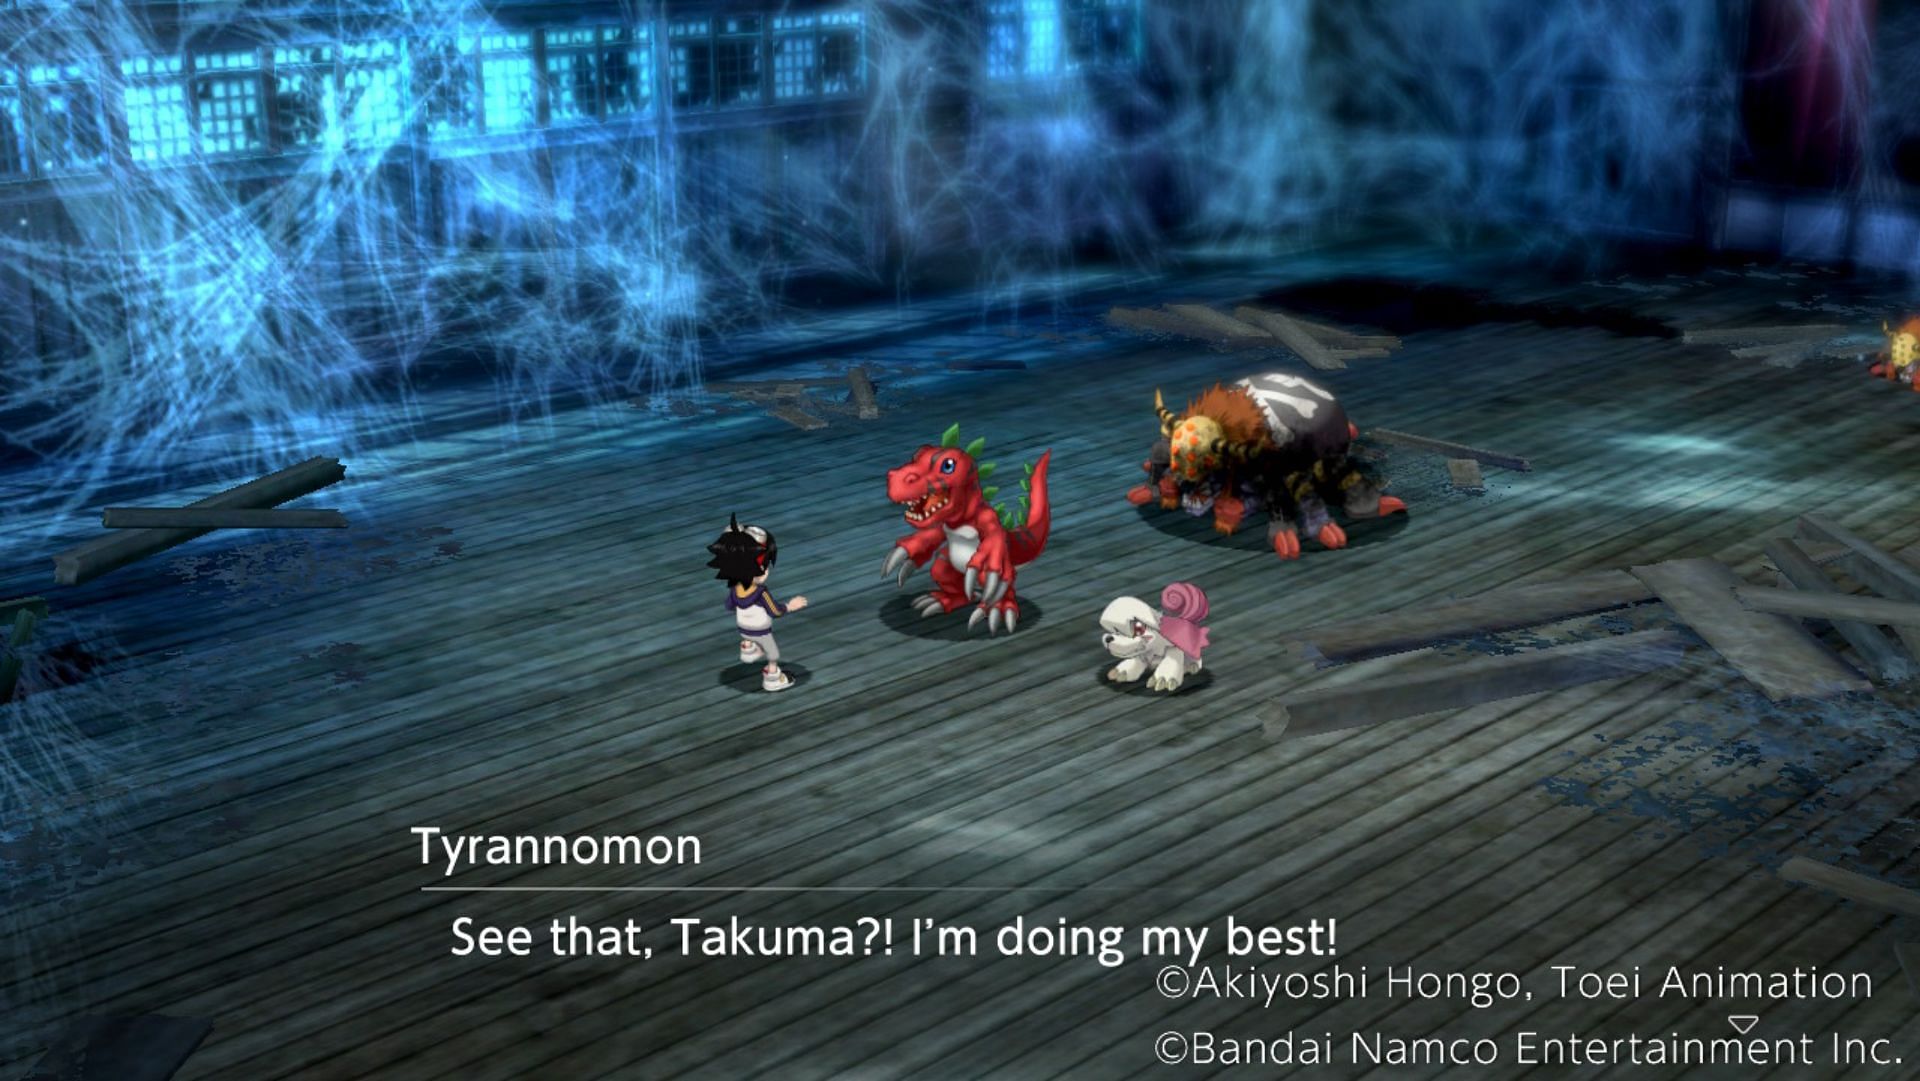 The characters in the game, both Digimon and human are really charming and have well-written dialogue (Image via Bandai Namco Entertainment Inc.)